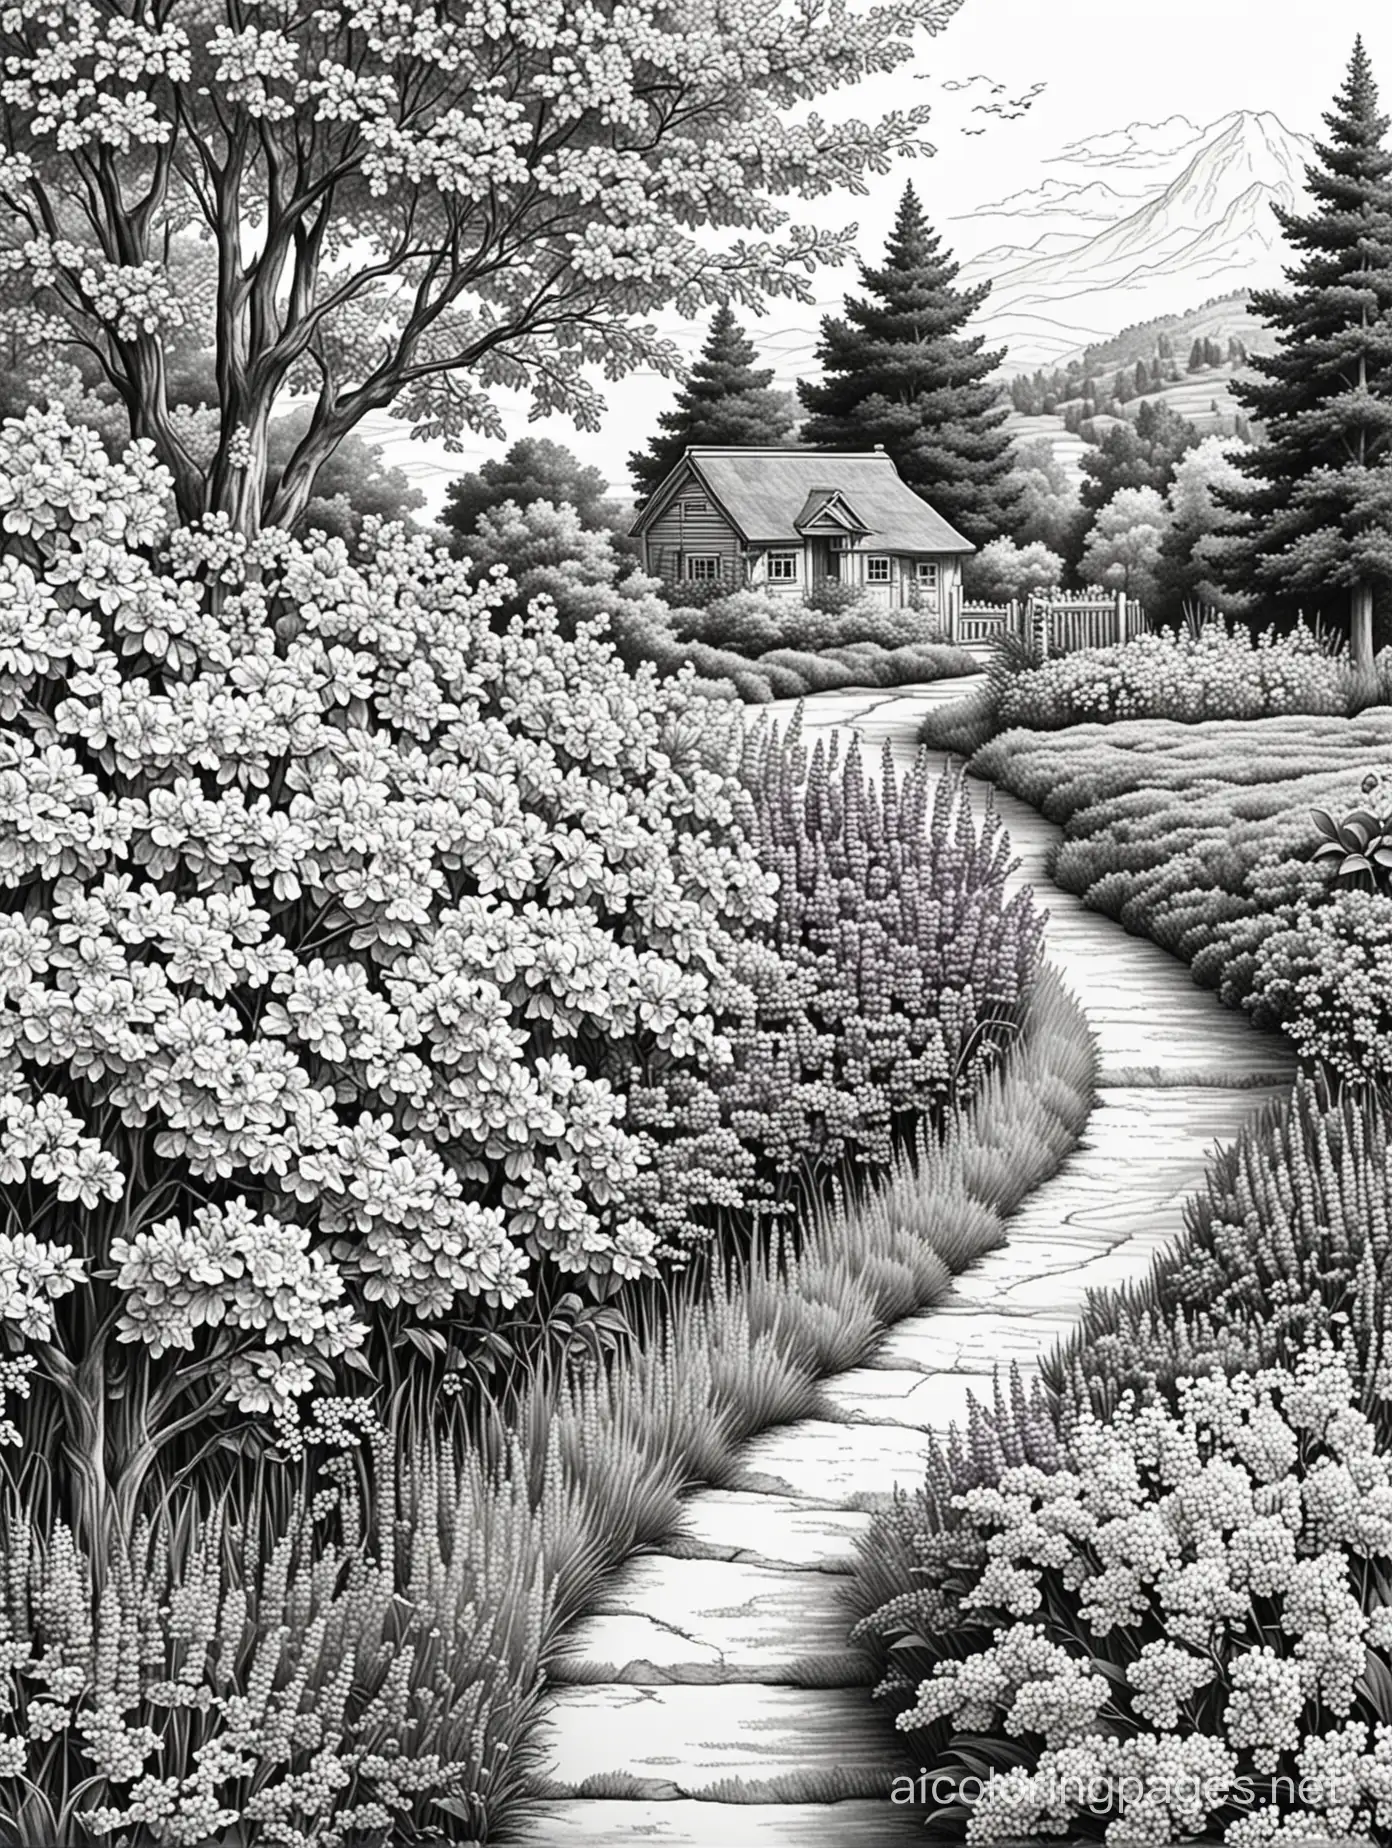 British-Garden-Sketch-Luxurious-Lilacs-and-Evergreen-Trees